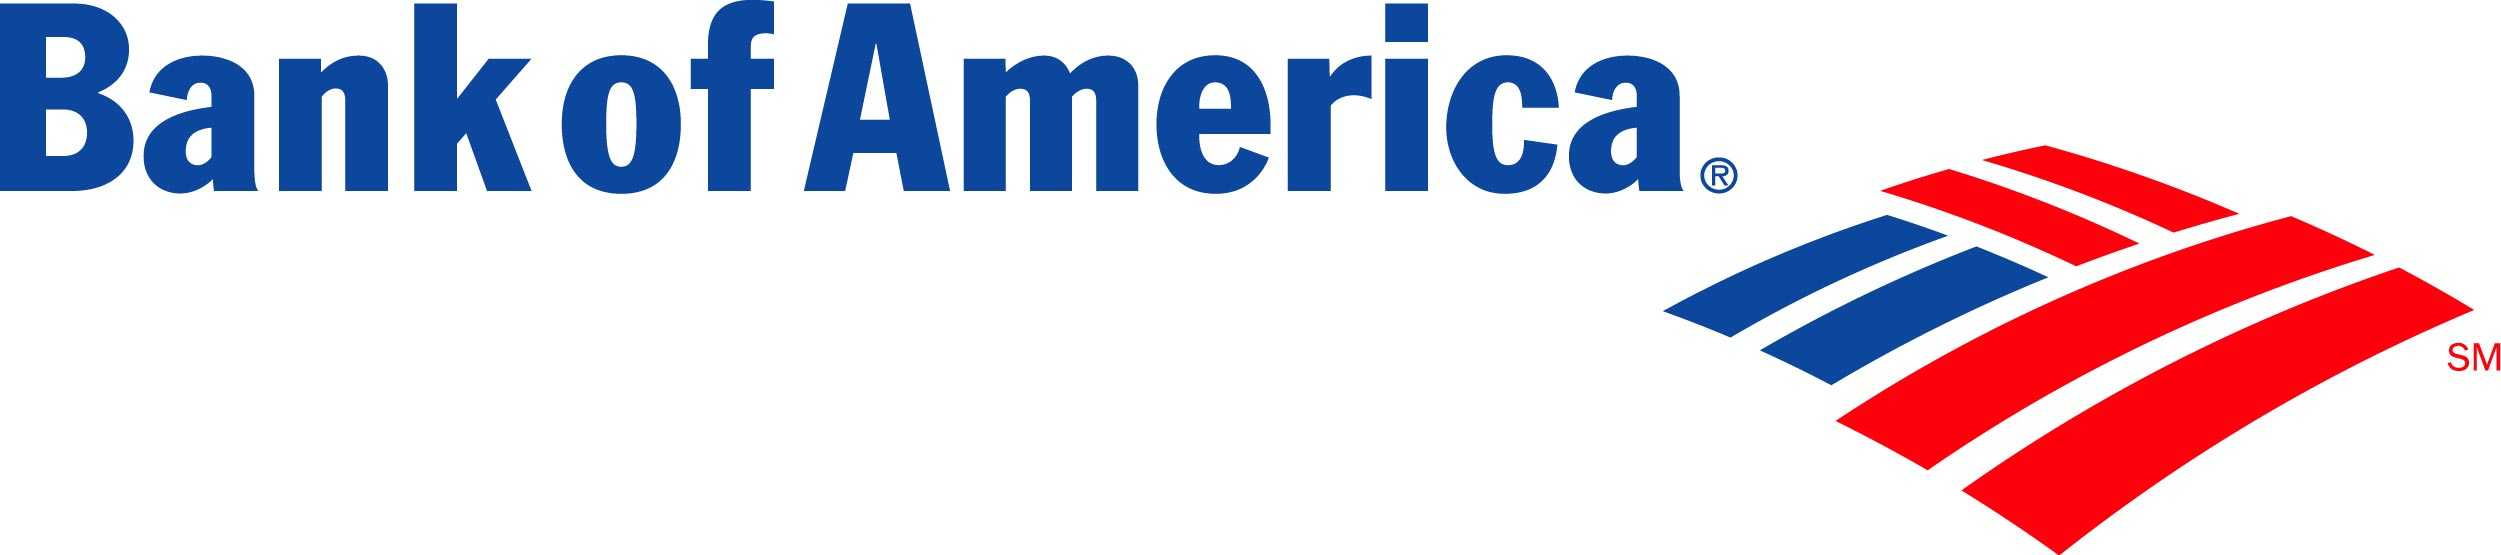 Bank of America Check Logo - UPDATE: Bank of America Becomes Fourth Company to Pull Advertising